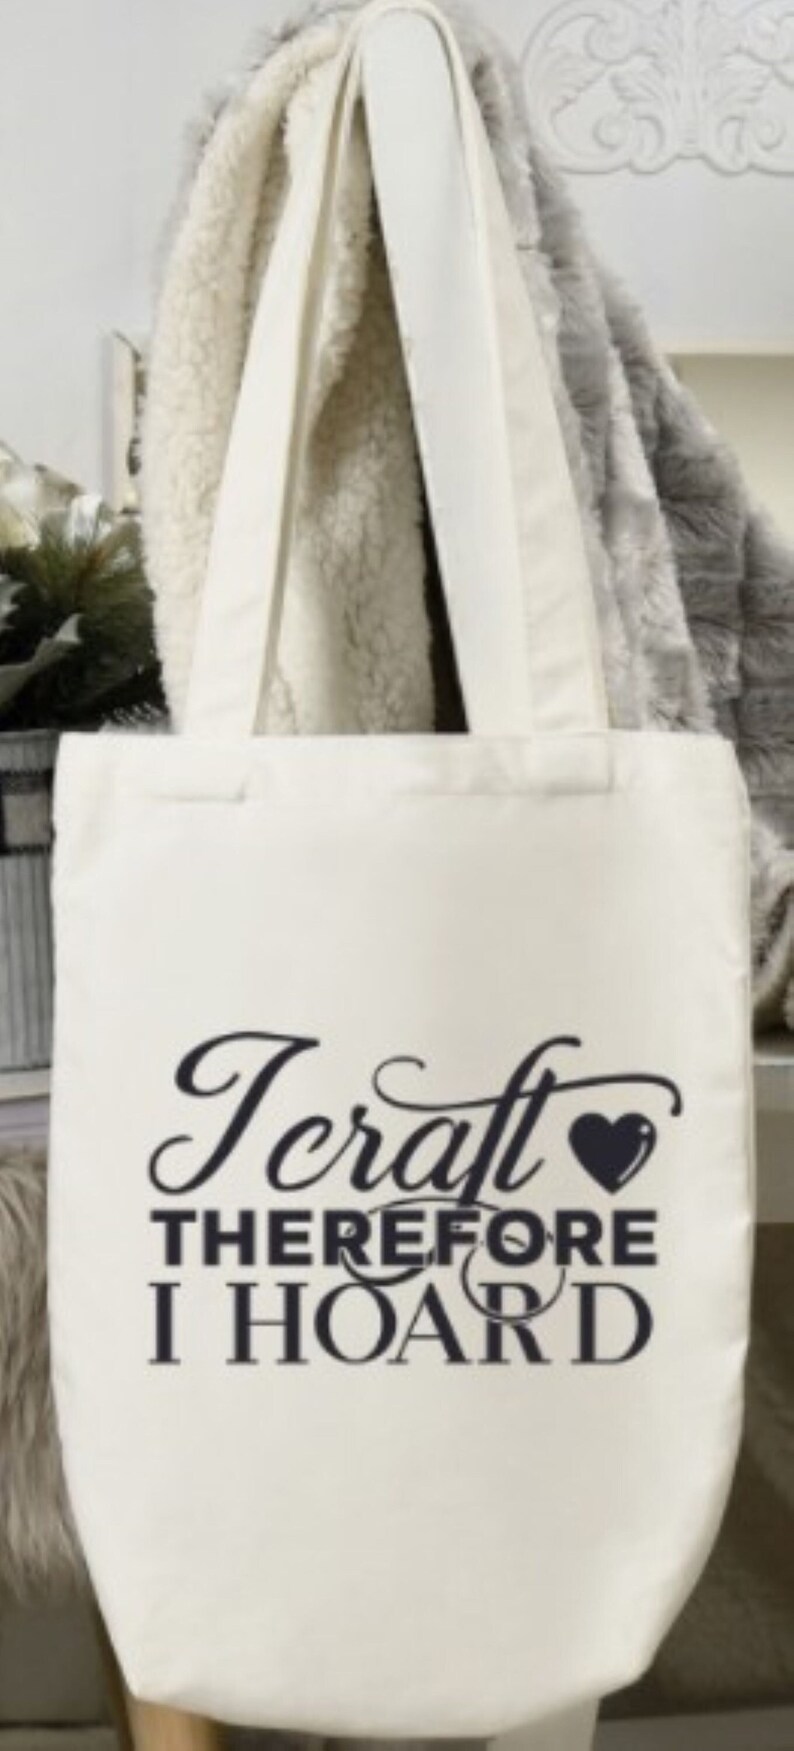 WHITE TOTE BAG, I craft therefore I hoard, Cotton Canvas Tote Bag image 1